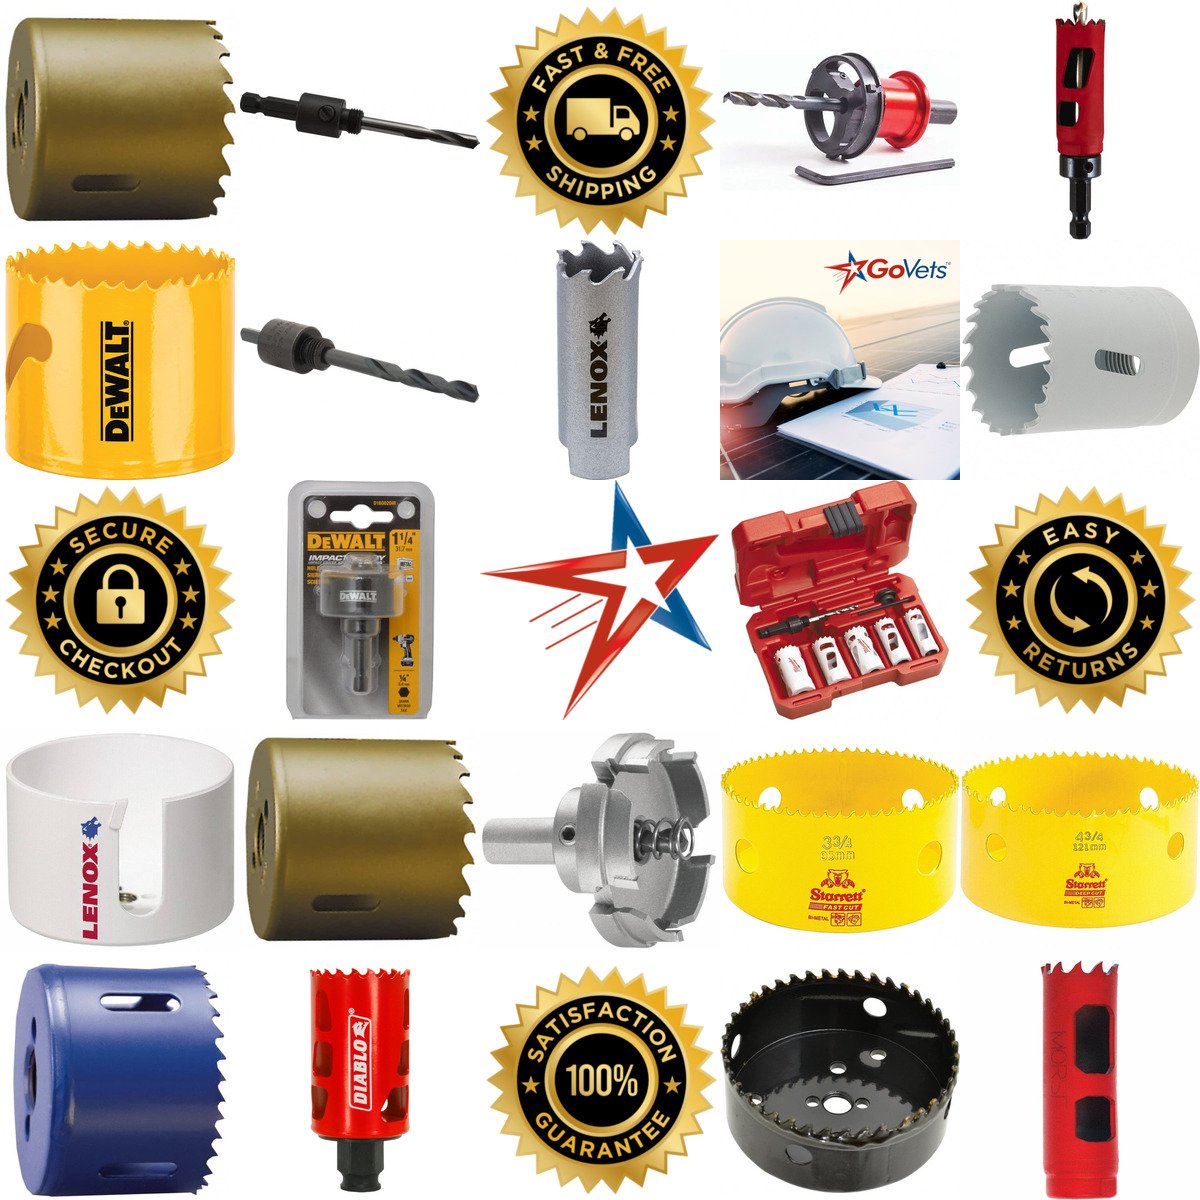 A selection of Hole Saws and Hole Cutting Tool Accessories products on GoVets